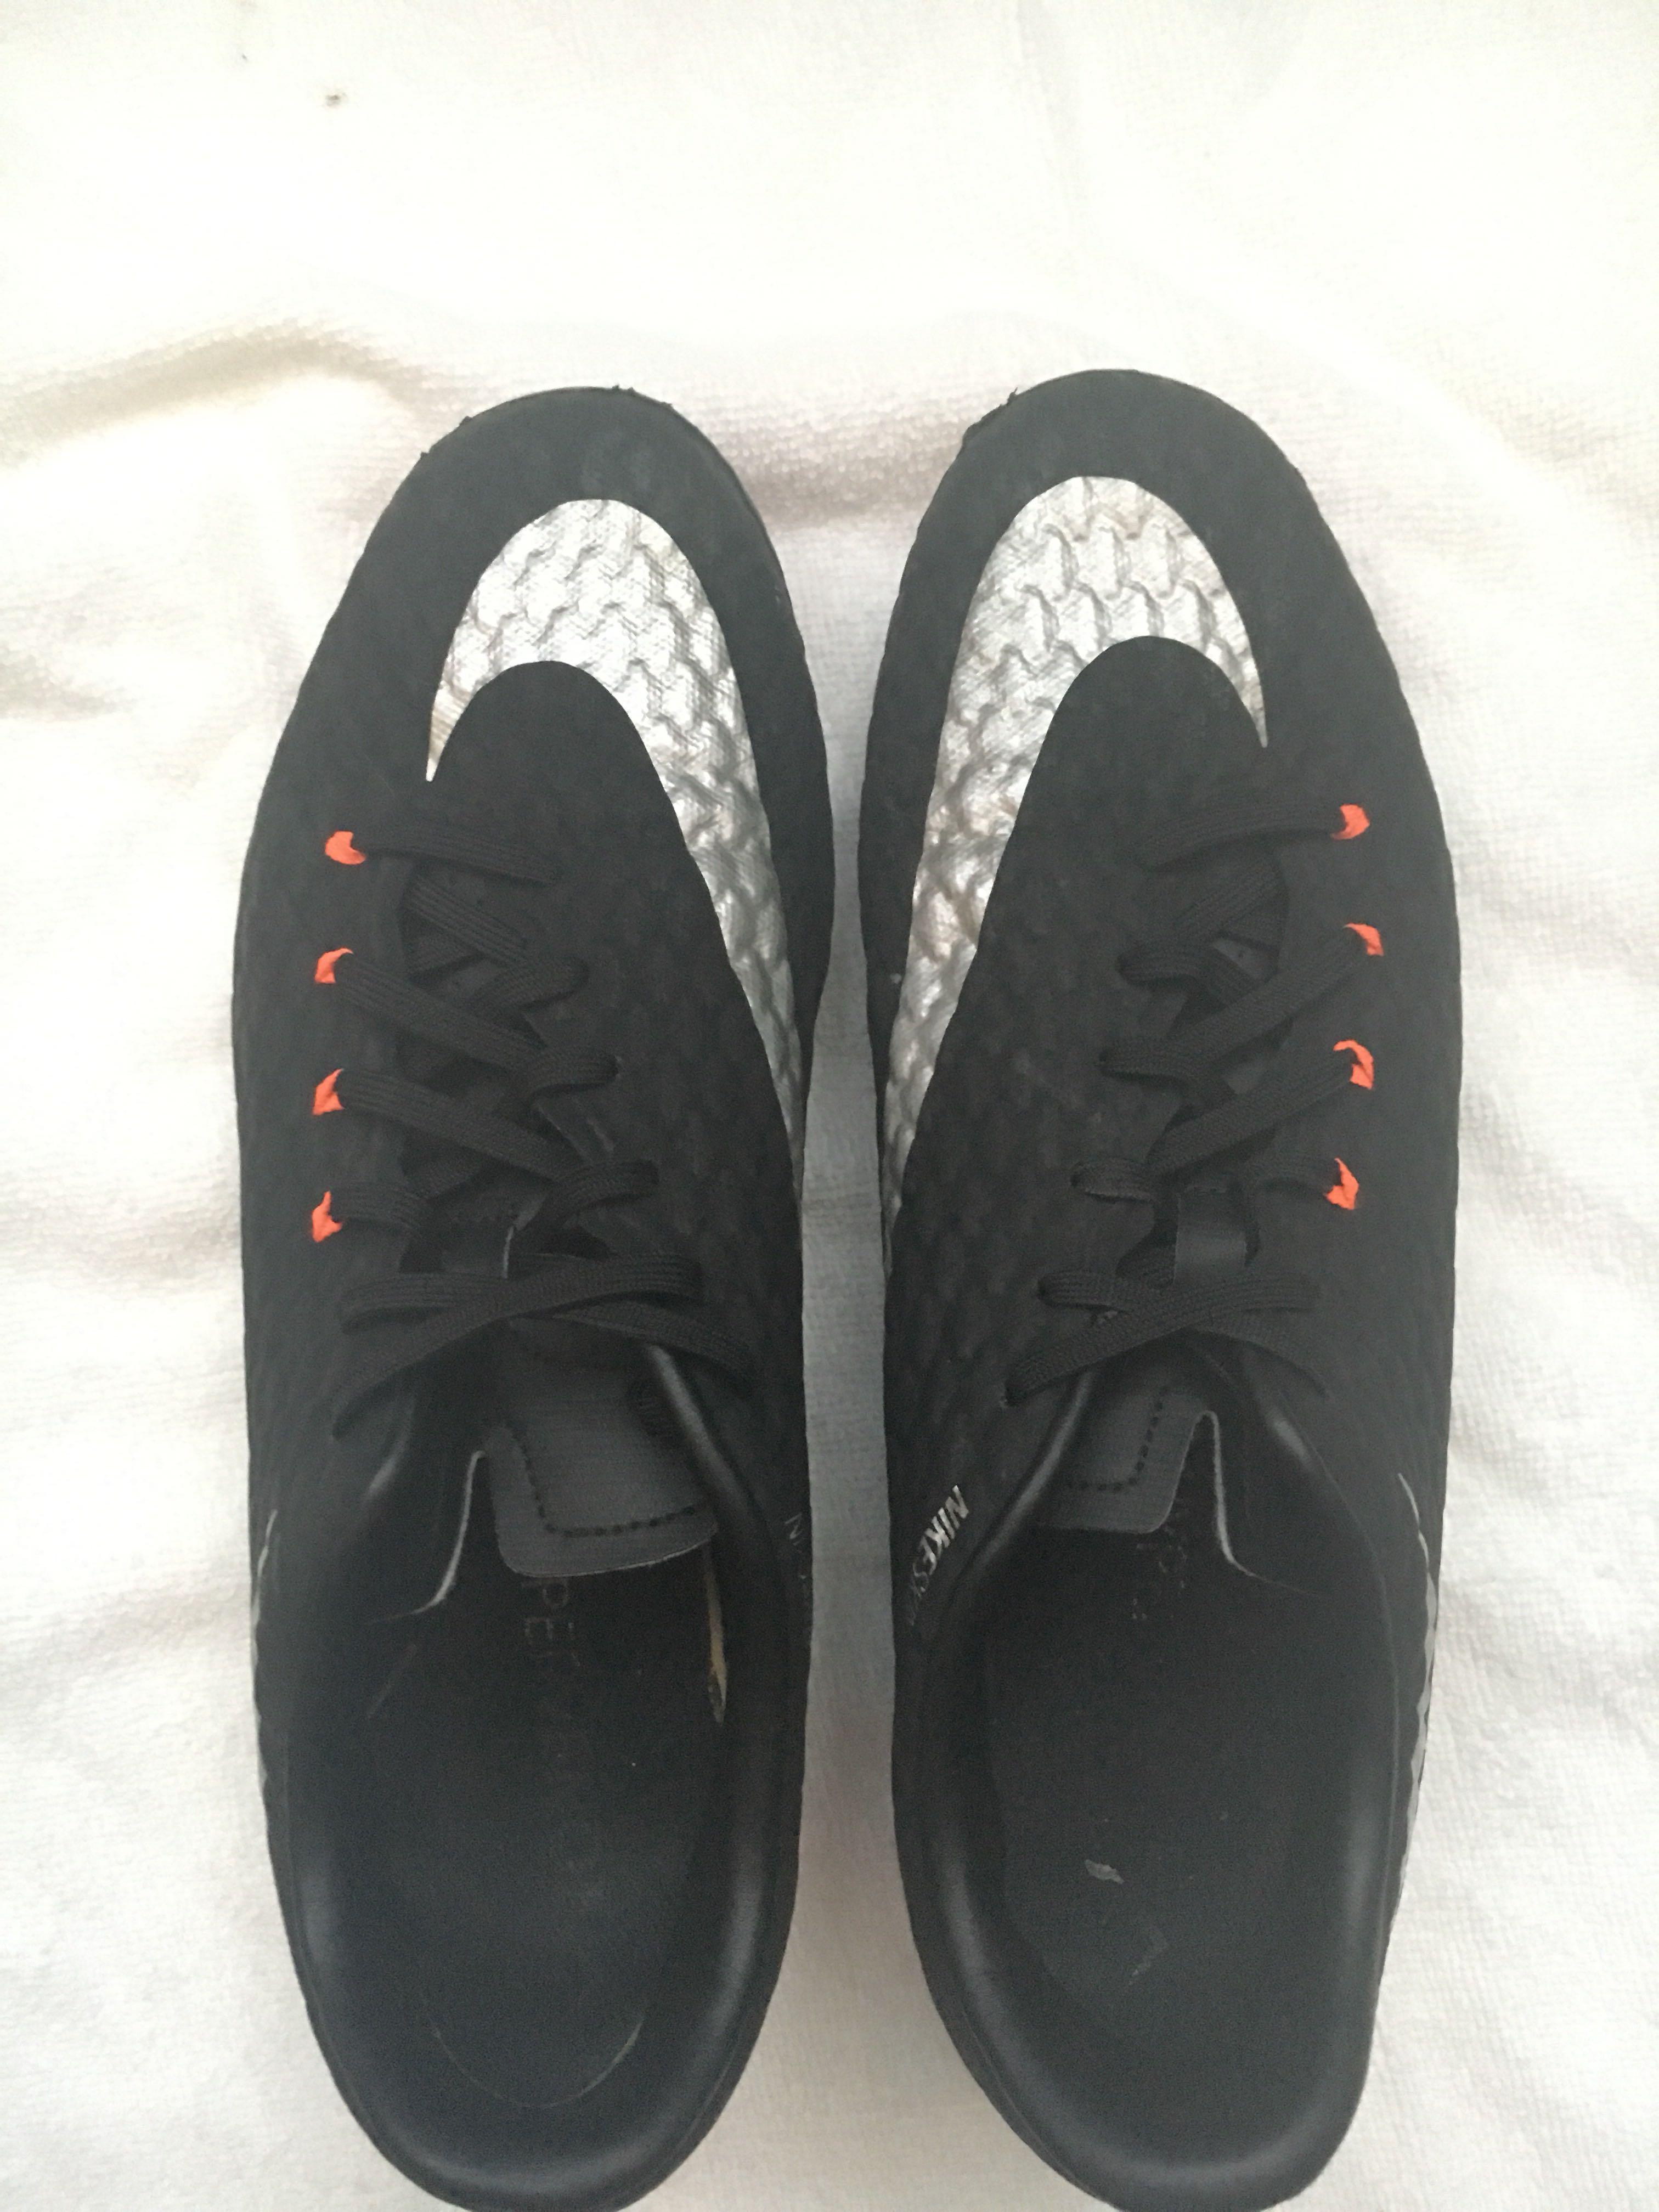 Nike Hypervenom Phinish ( Tech Craft ) Test y Review by